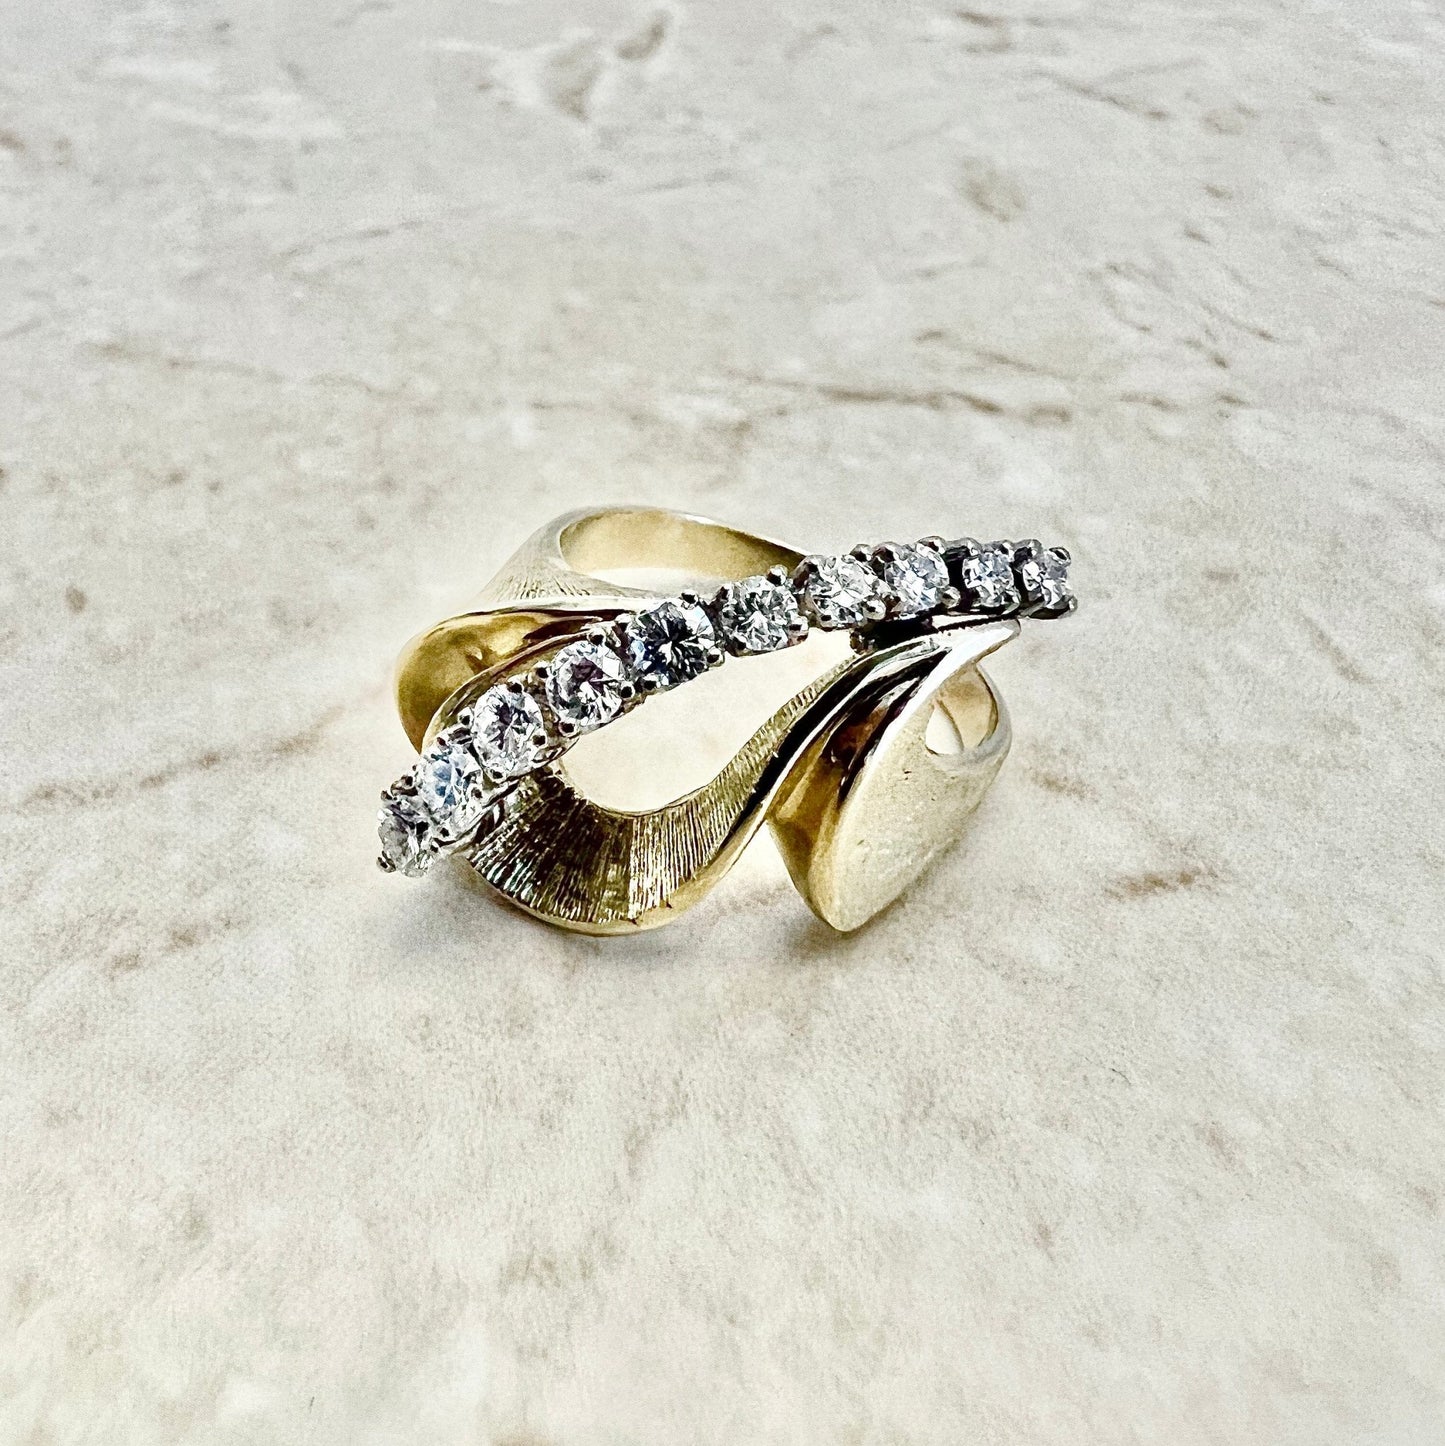 Fine Vintage 14K Diamond Cocktail Ring - Gold Graduated Diamond Ring - Two Tone Yellow & White Gold - Birthday Gift For Her - Best Gift